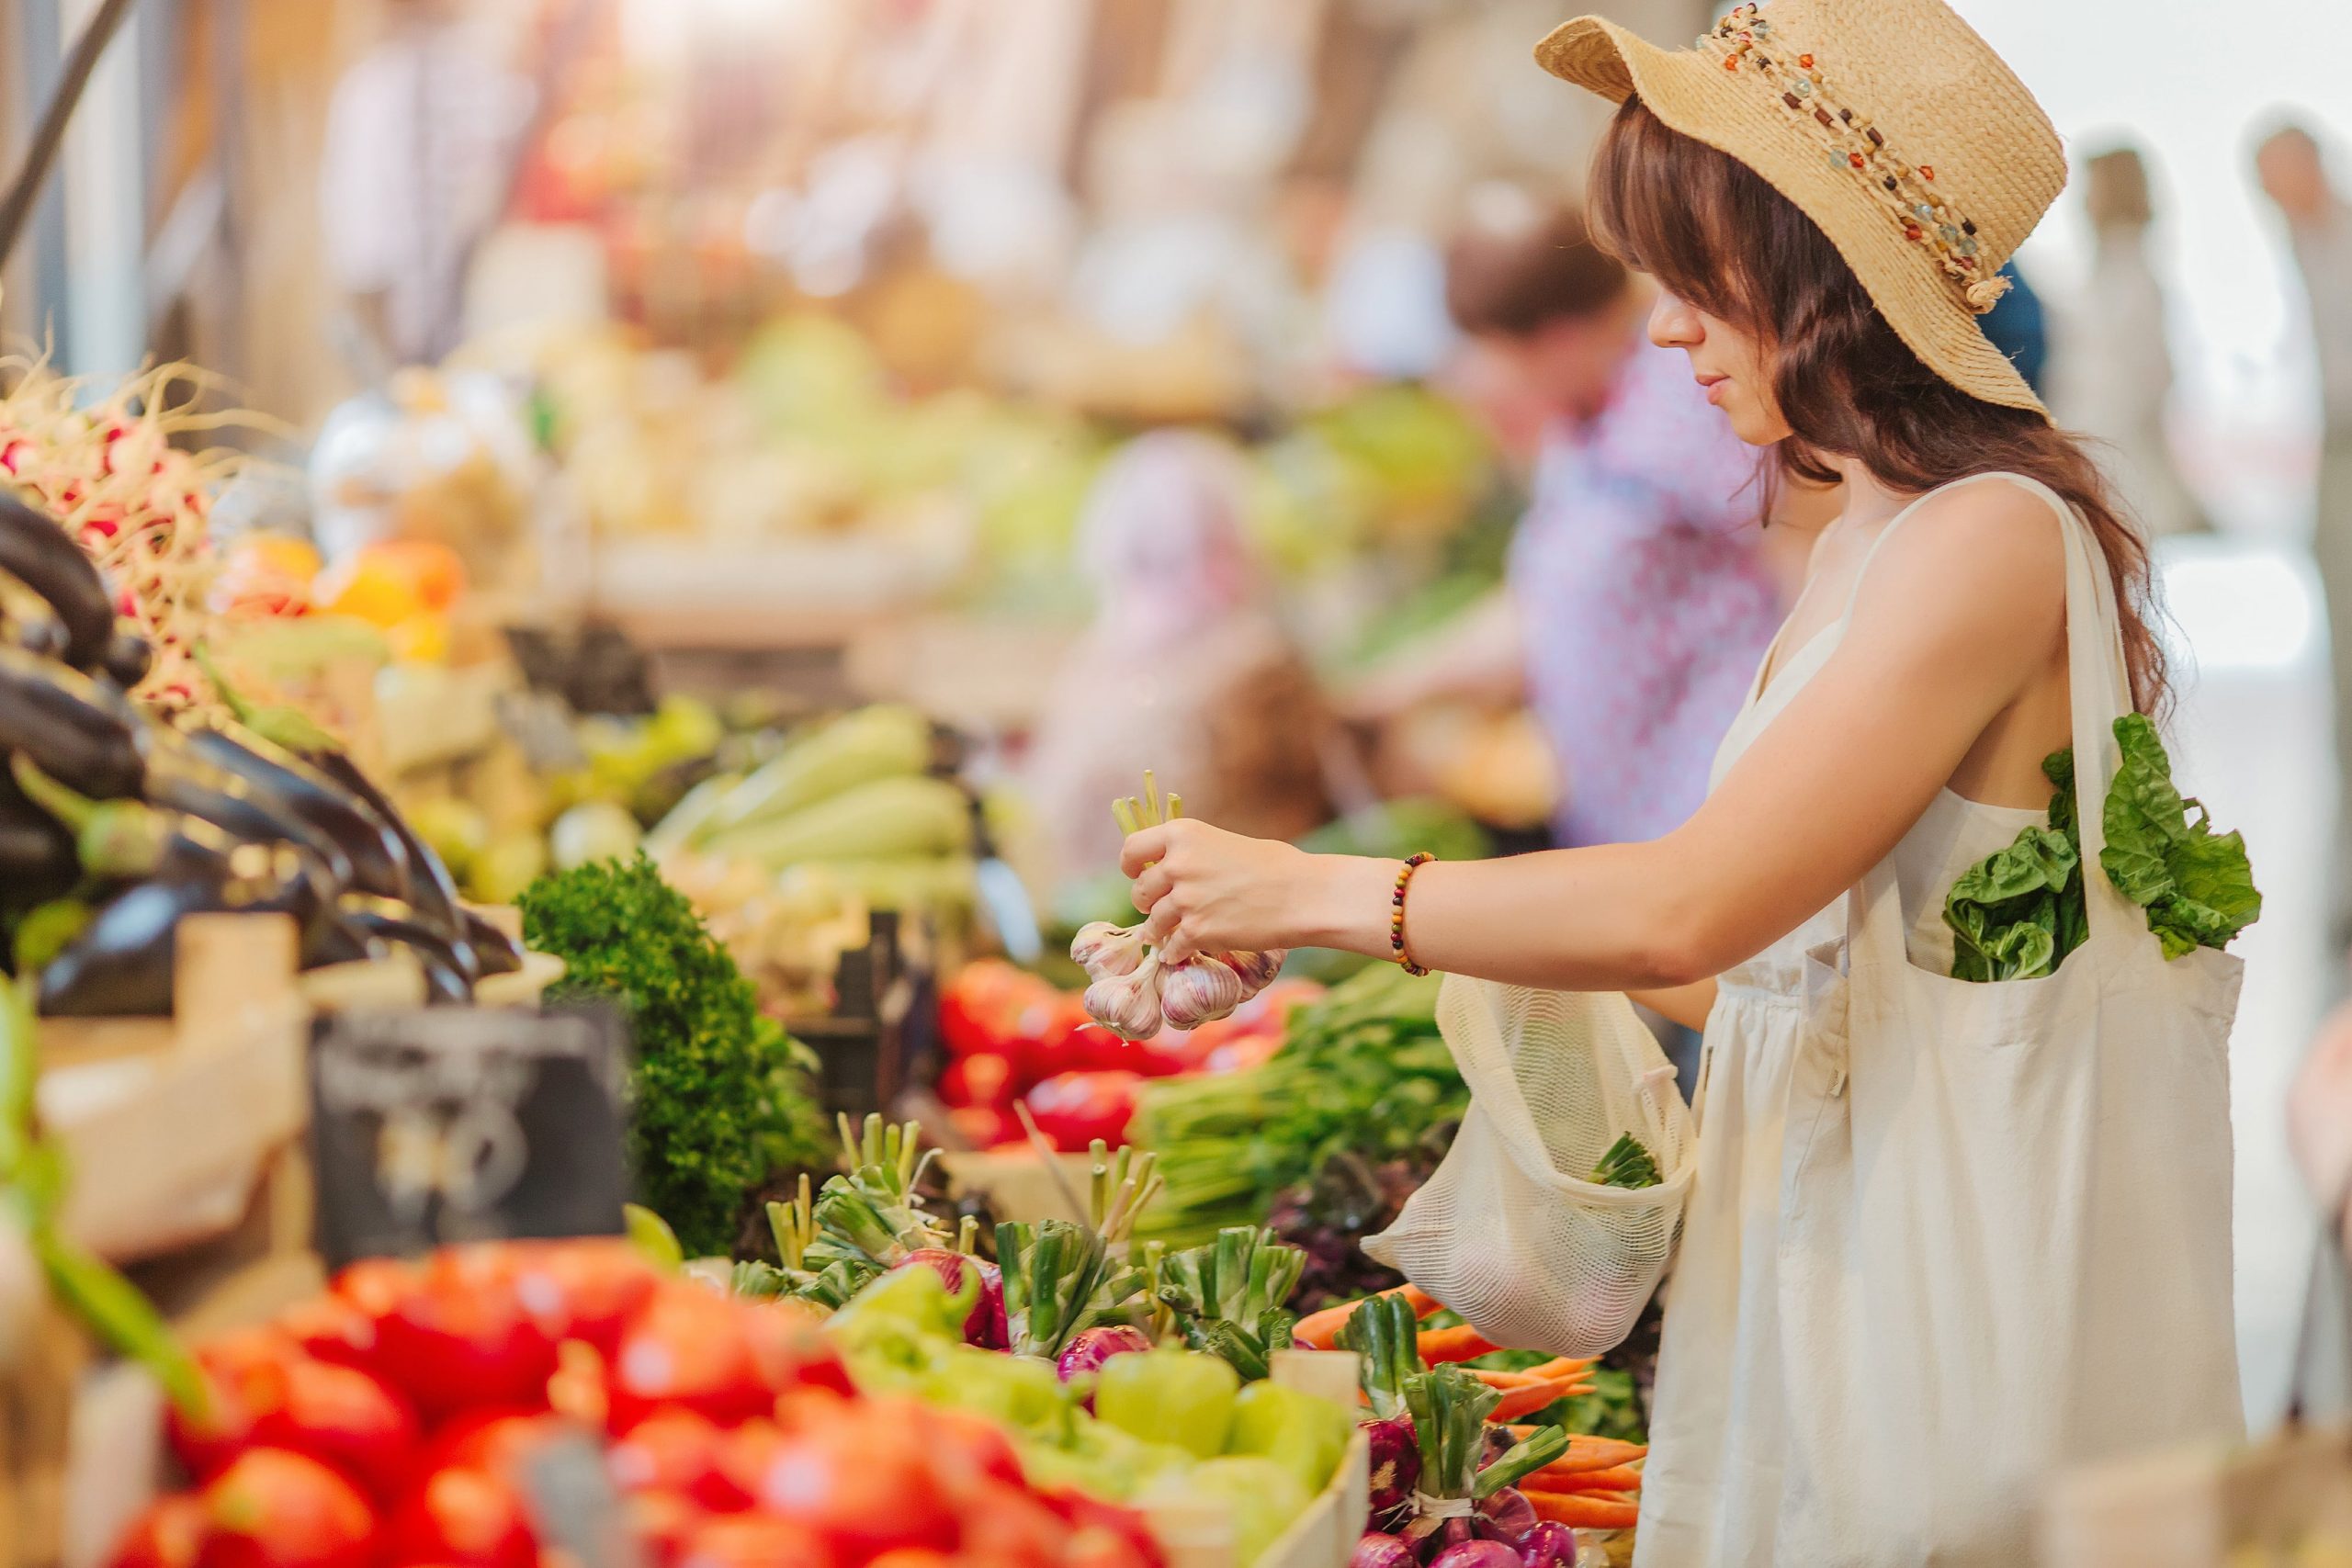 image of woman browsing produce at the farmers market